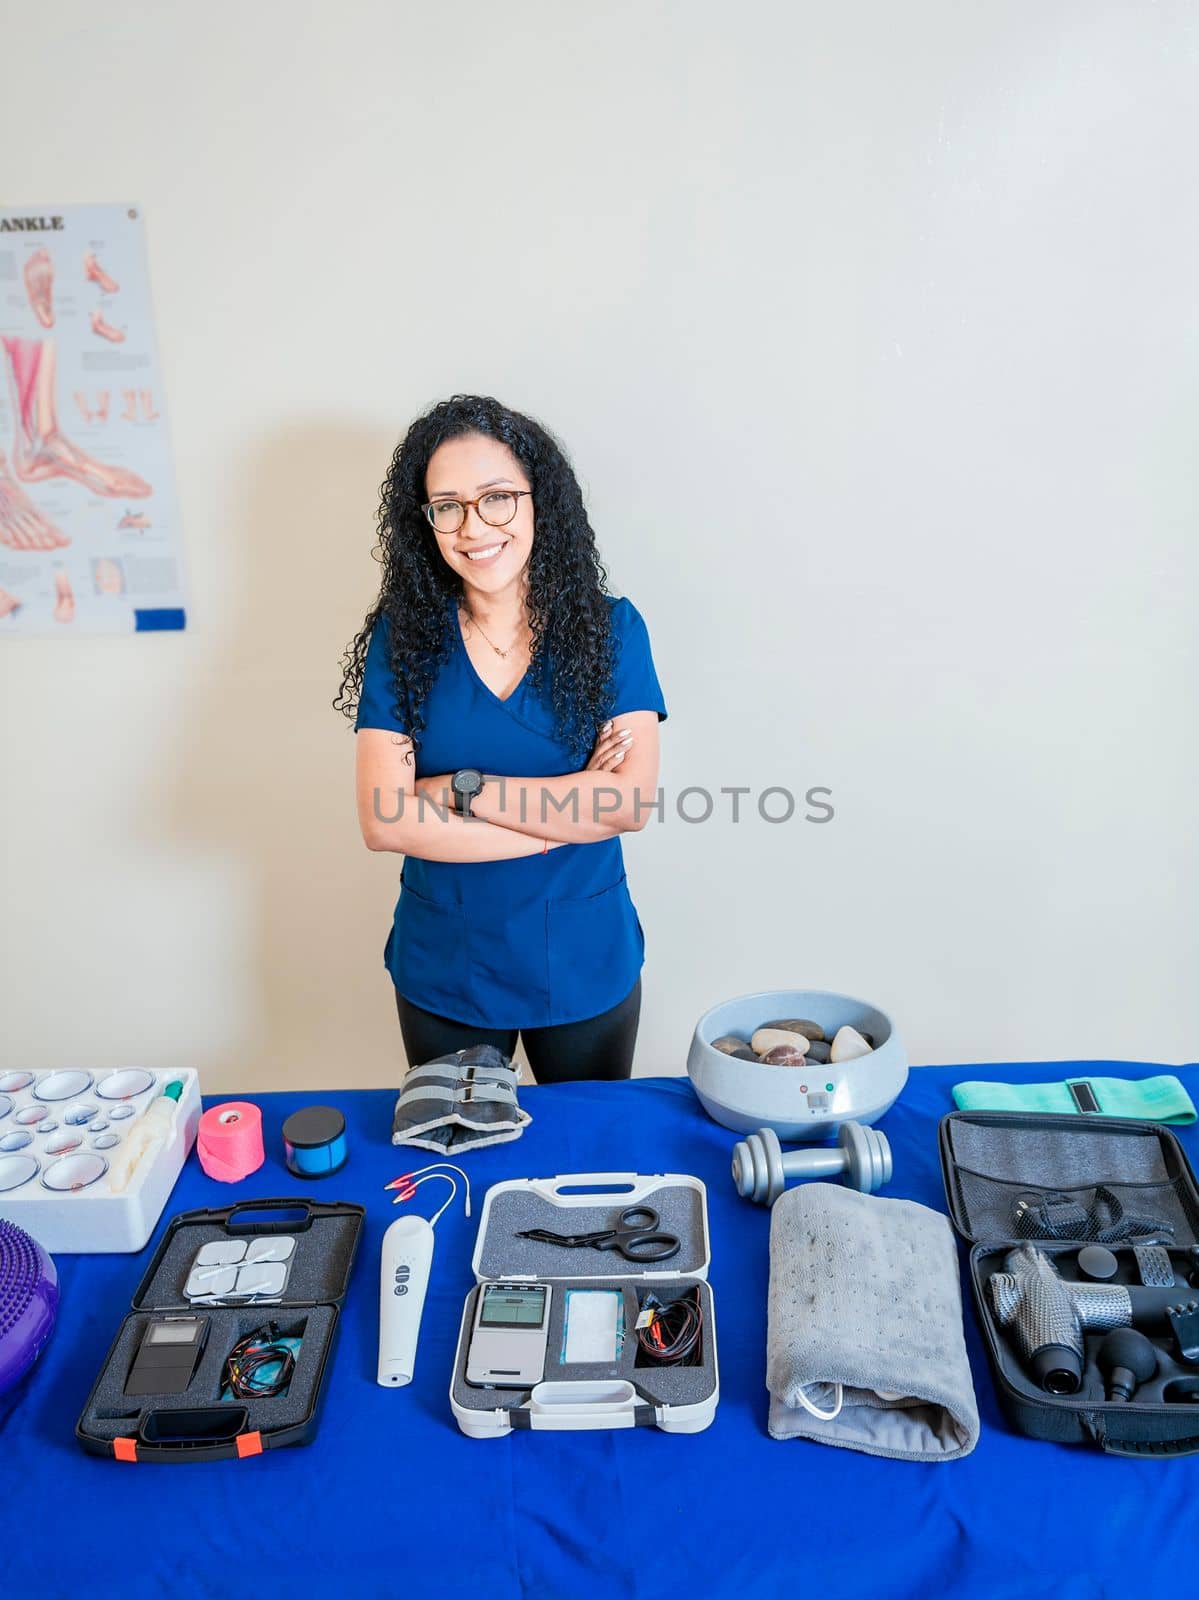 Physiotherapist with physiotherapy accessories. Smiling physiotherapist showing physiotherapy accessories, Physiotherapist woman showing therapy accessories and equipment